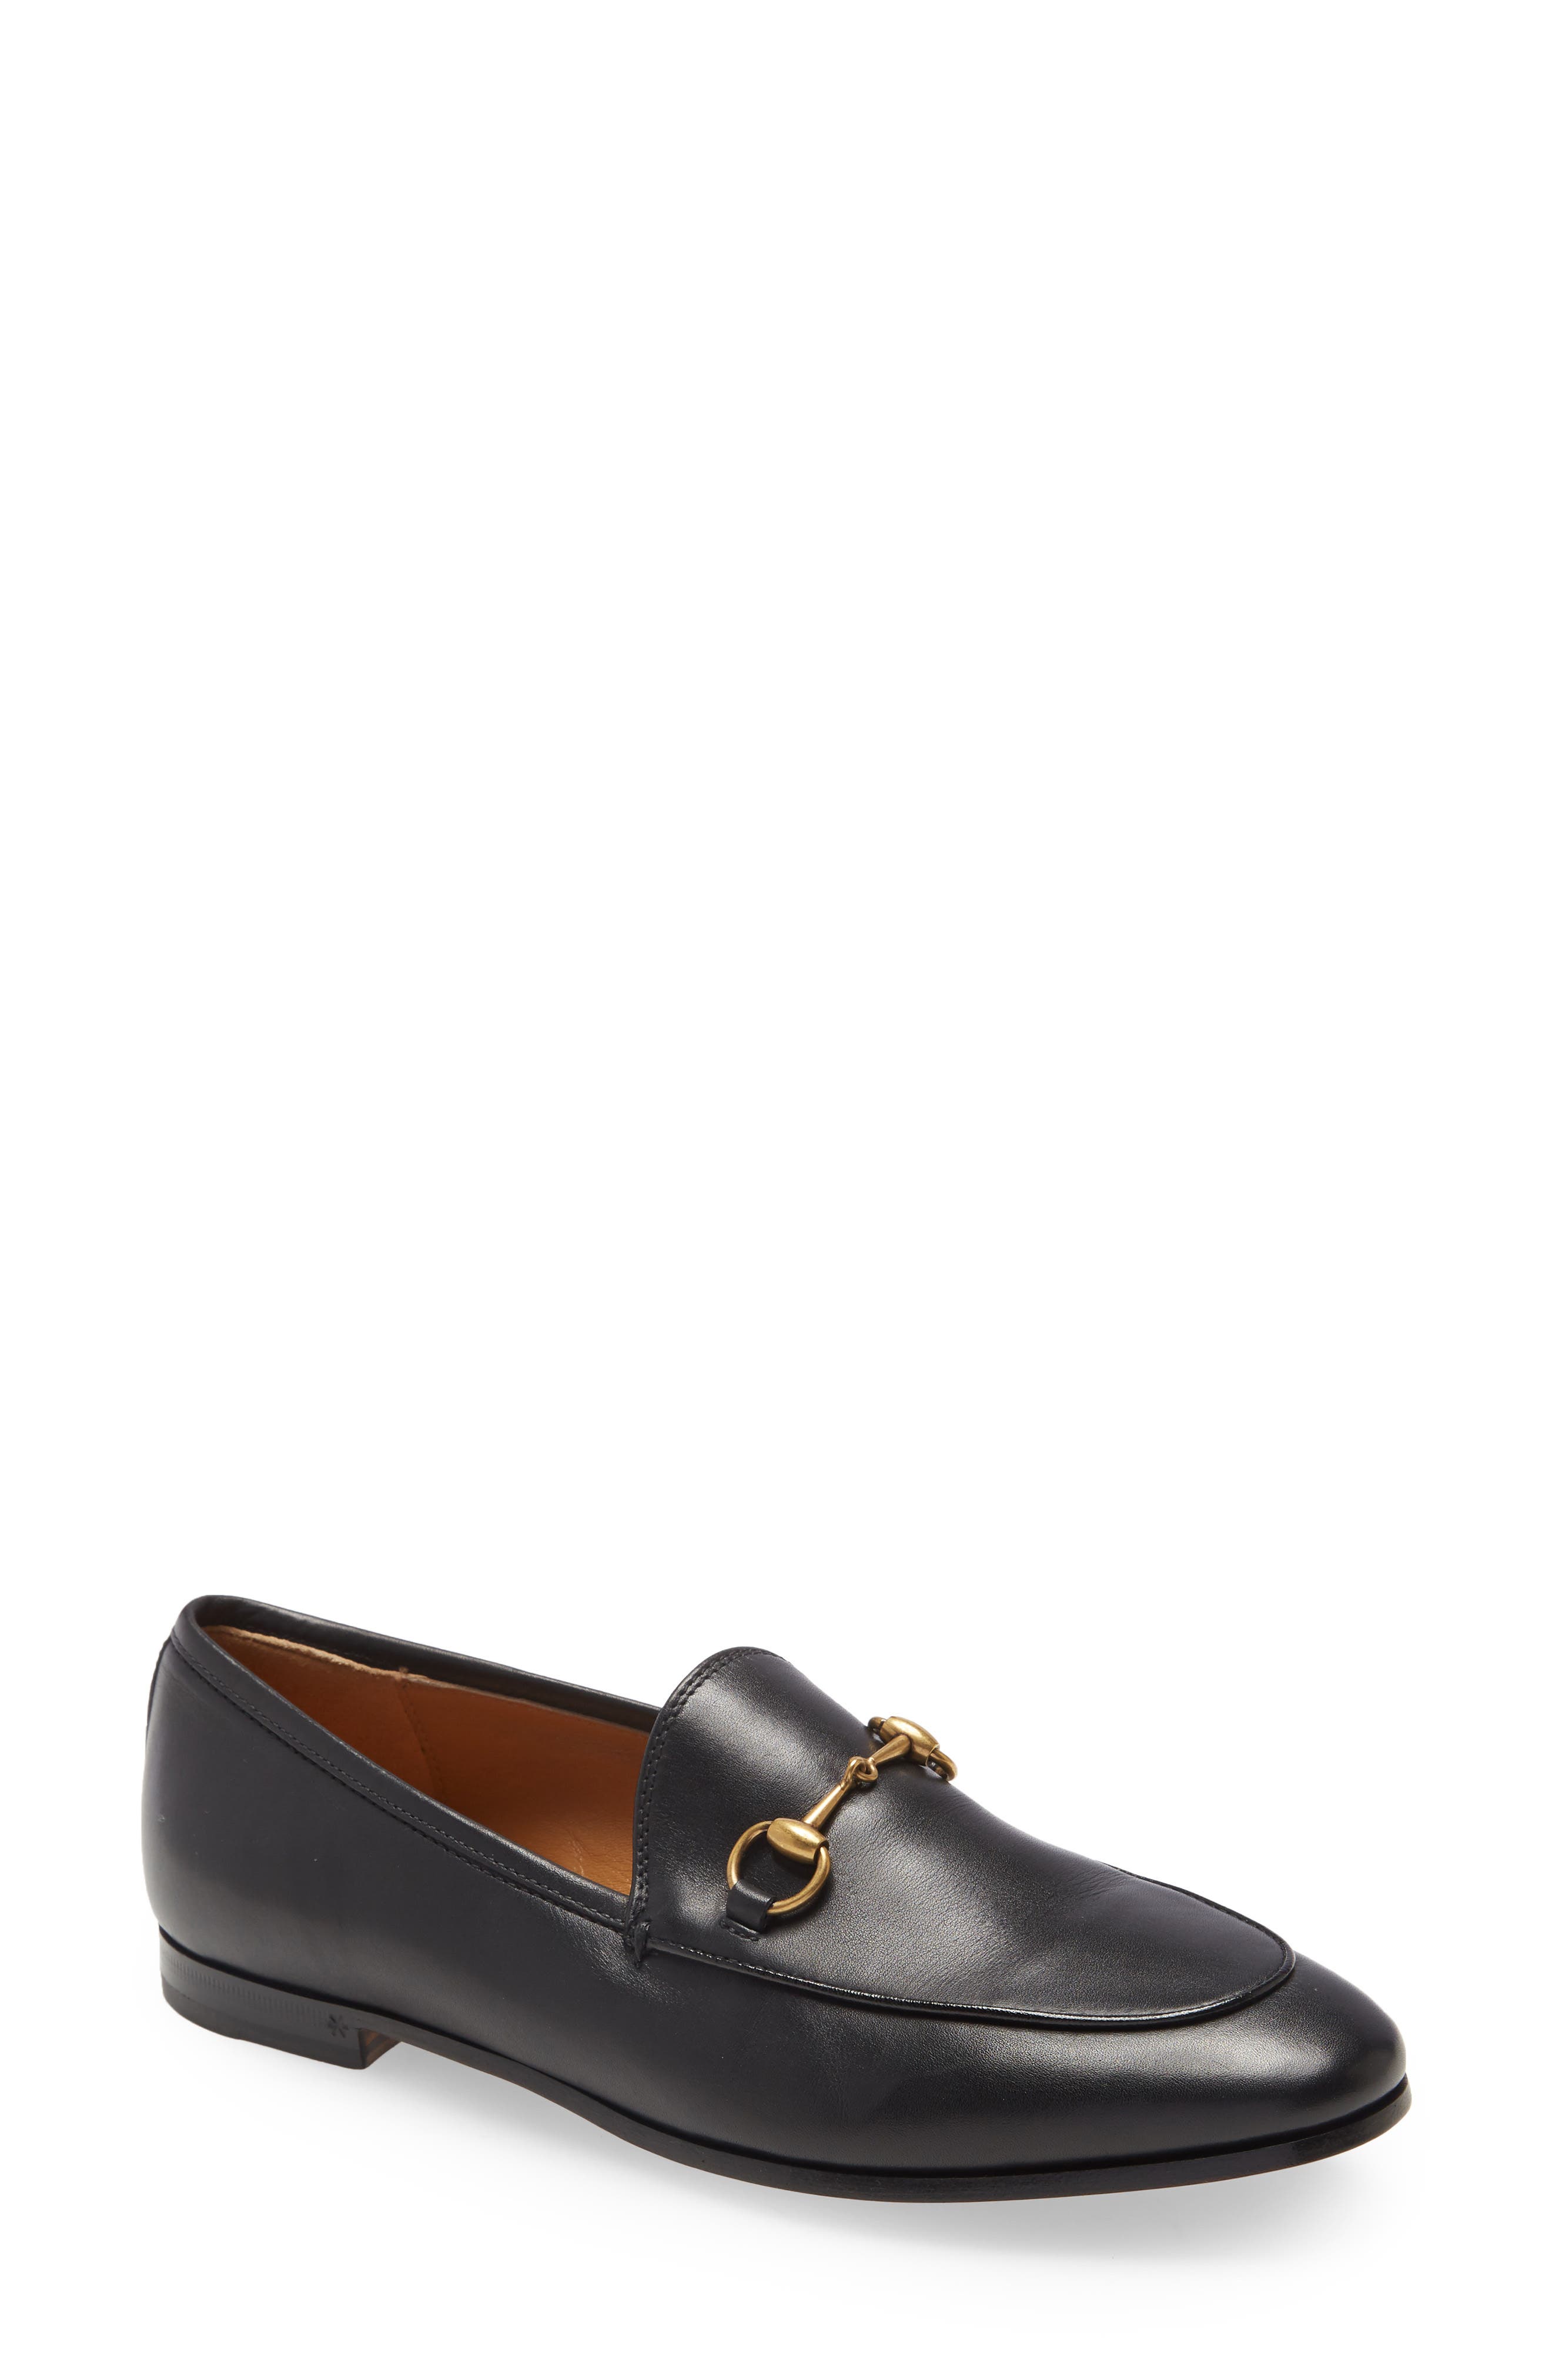 10 Timeless Loafers You'll Be Able to Wear With Everything | Who What Wear